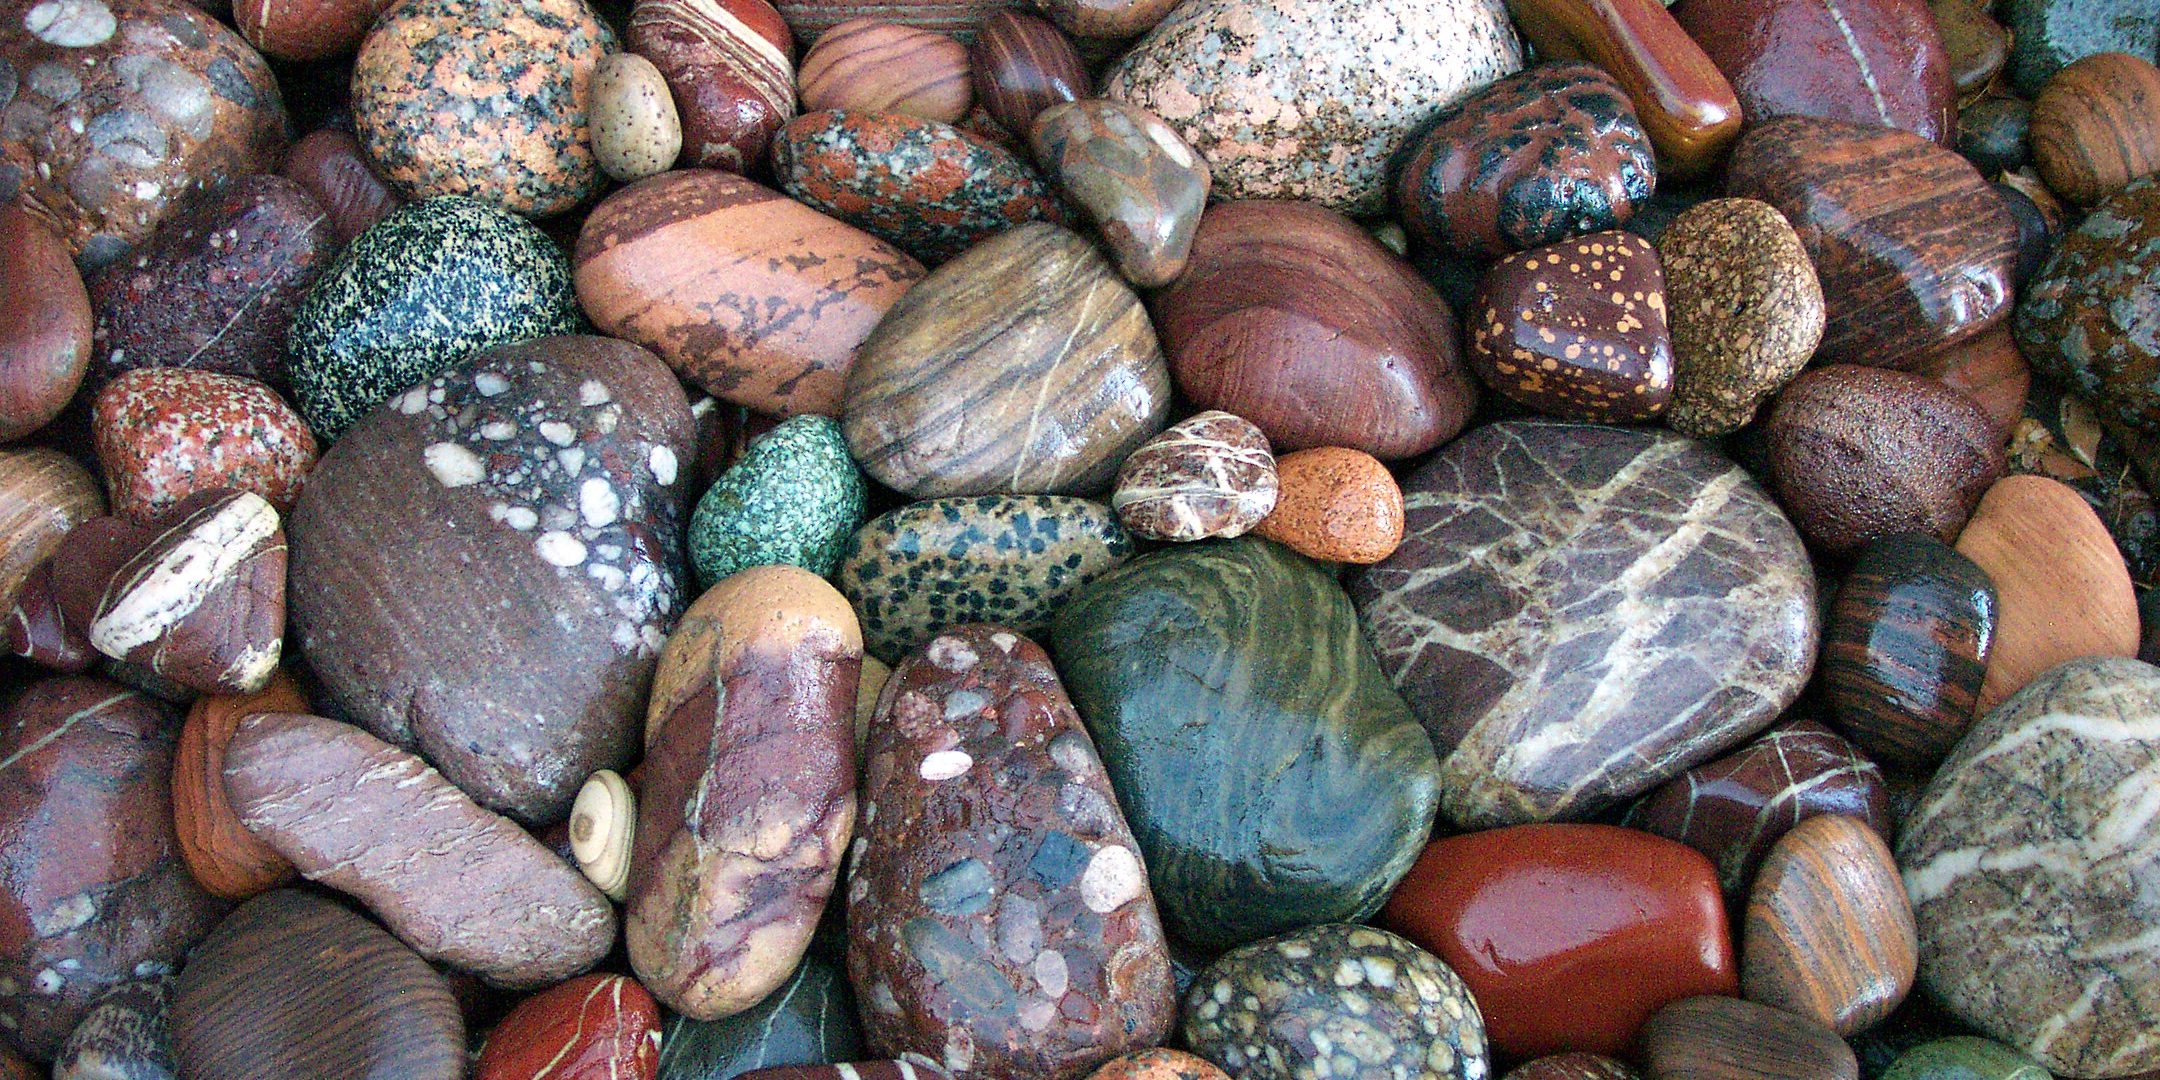 Some rocks from LuAnn's collection